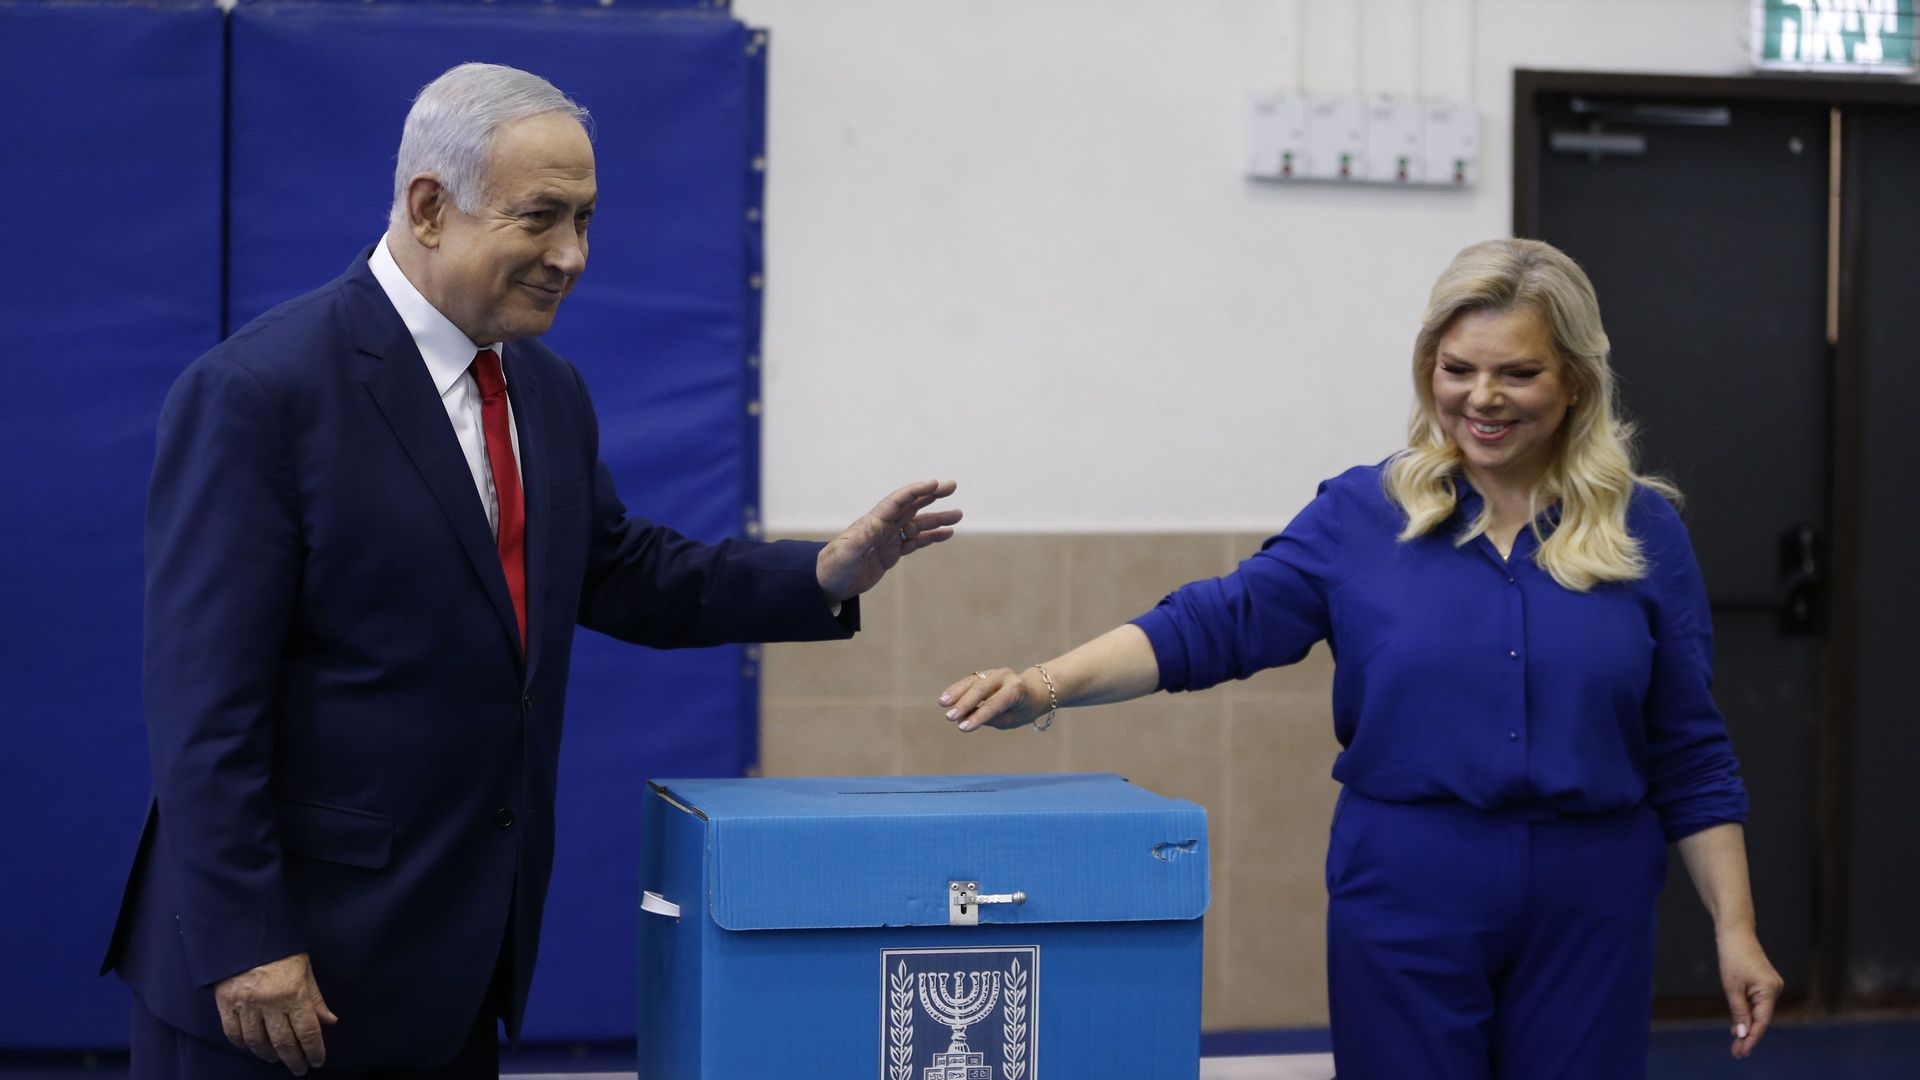 Netanyahu voting with his wife